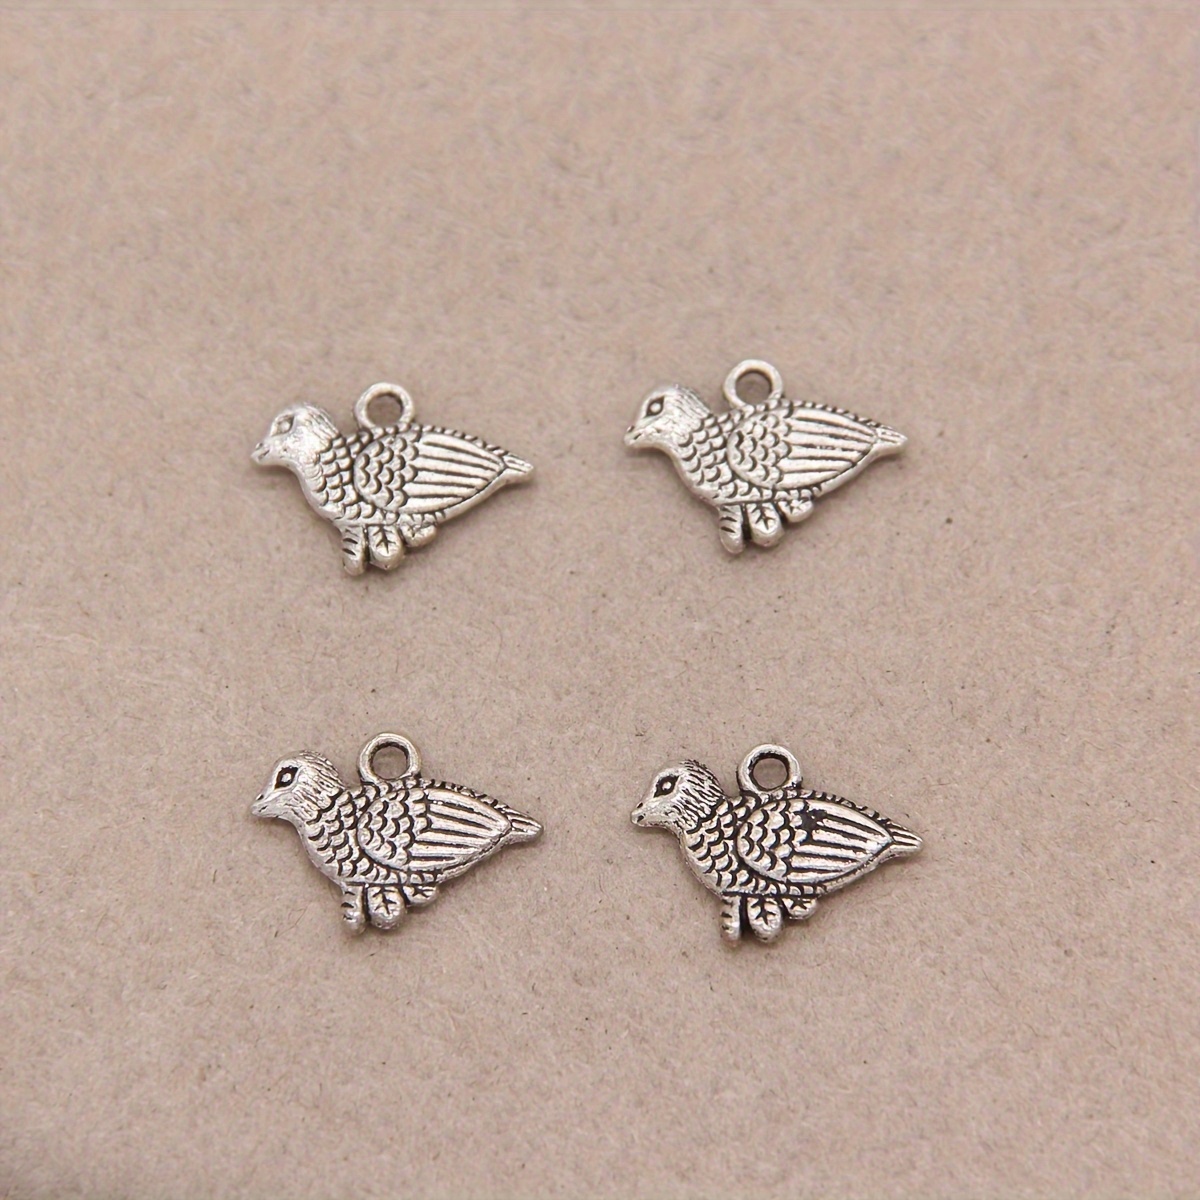 Silver Pewter (zinc-based Alloy) 16x21mm Nativity Animal Charms